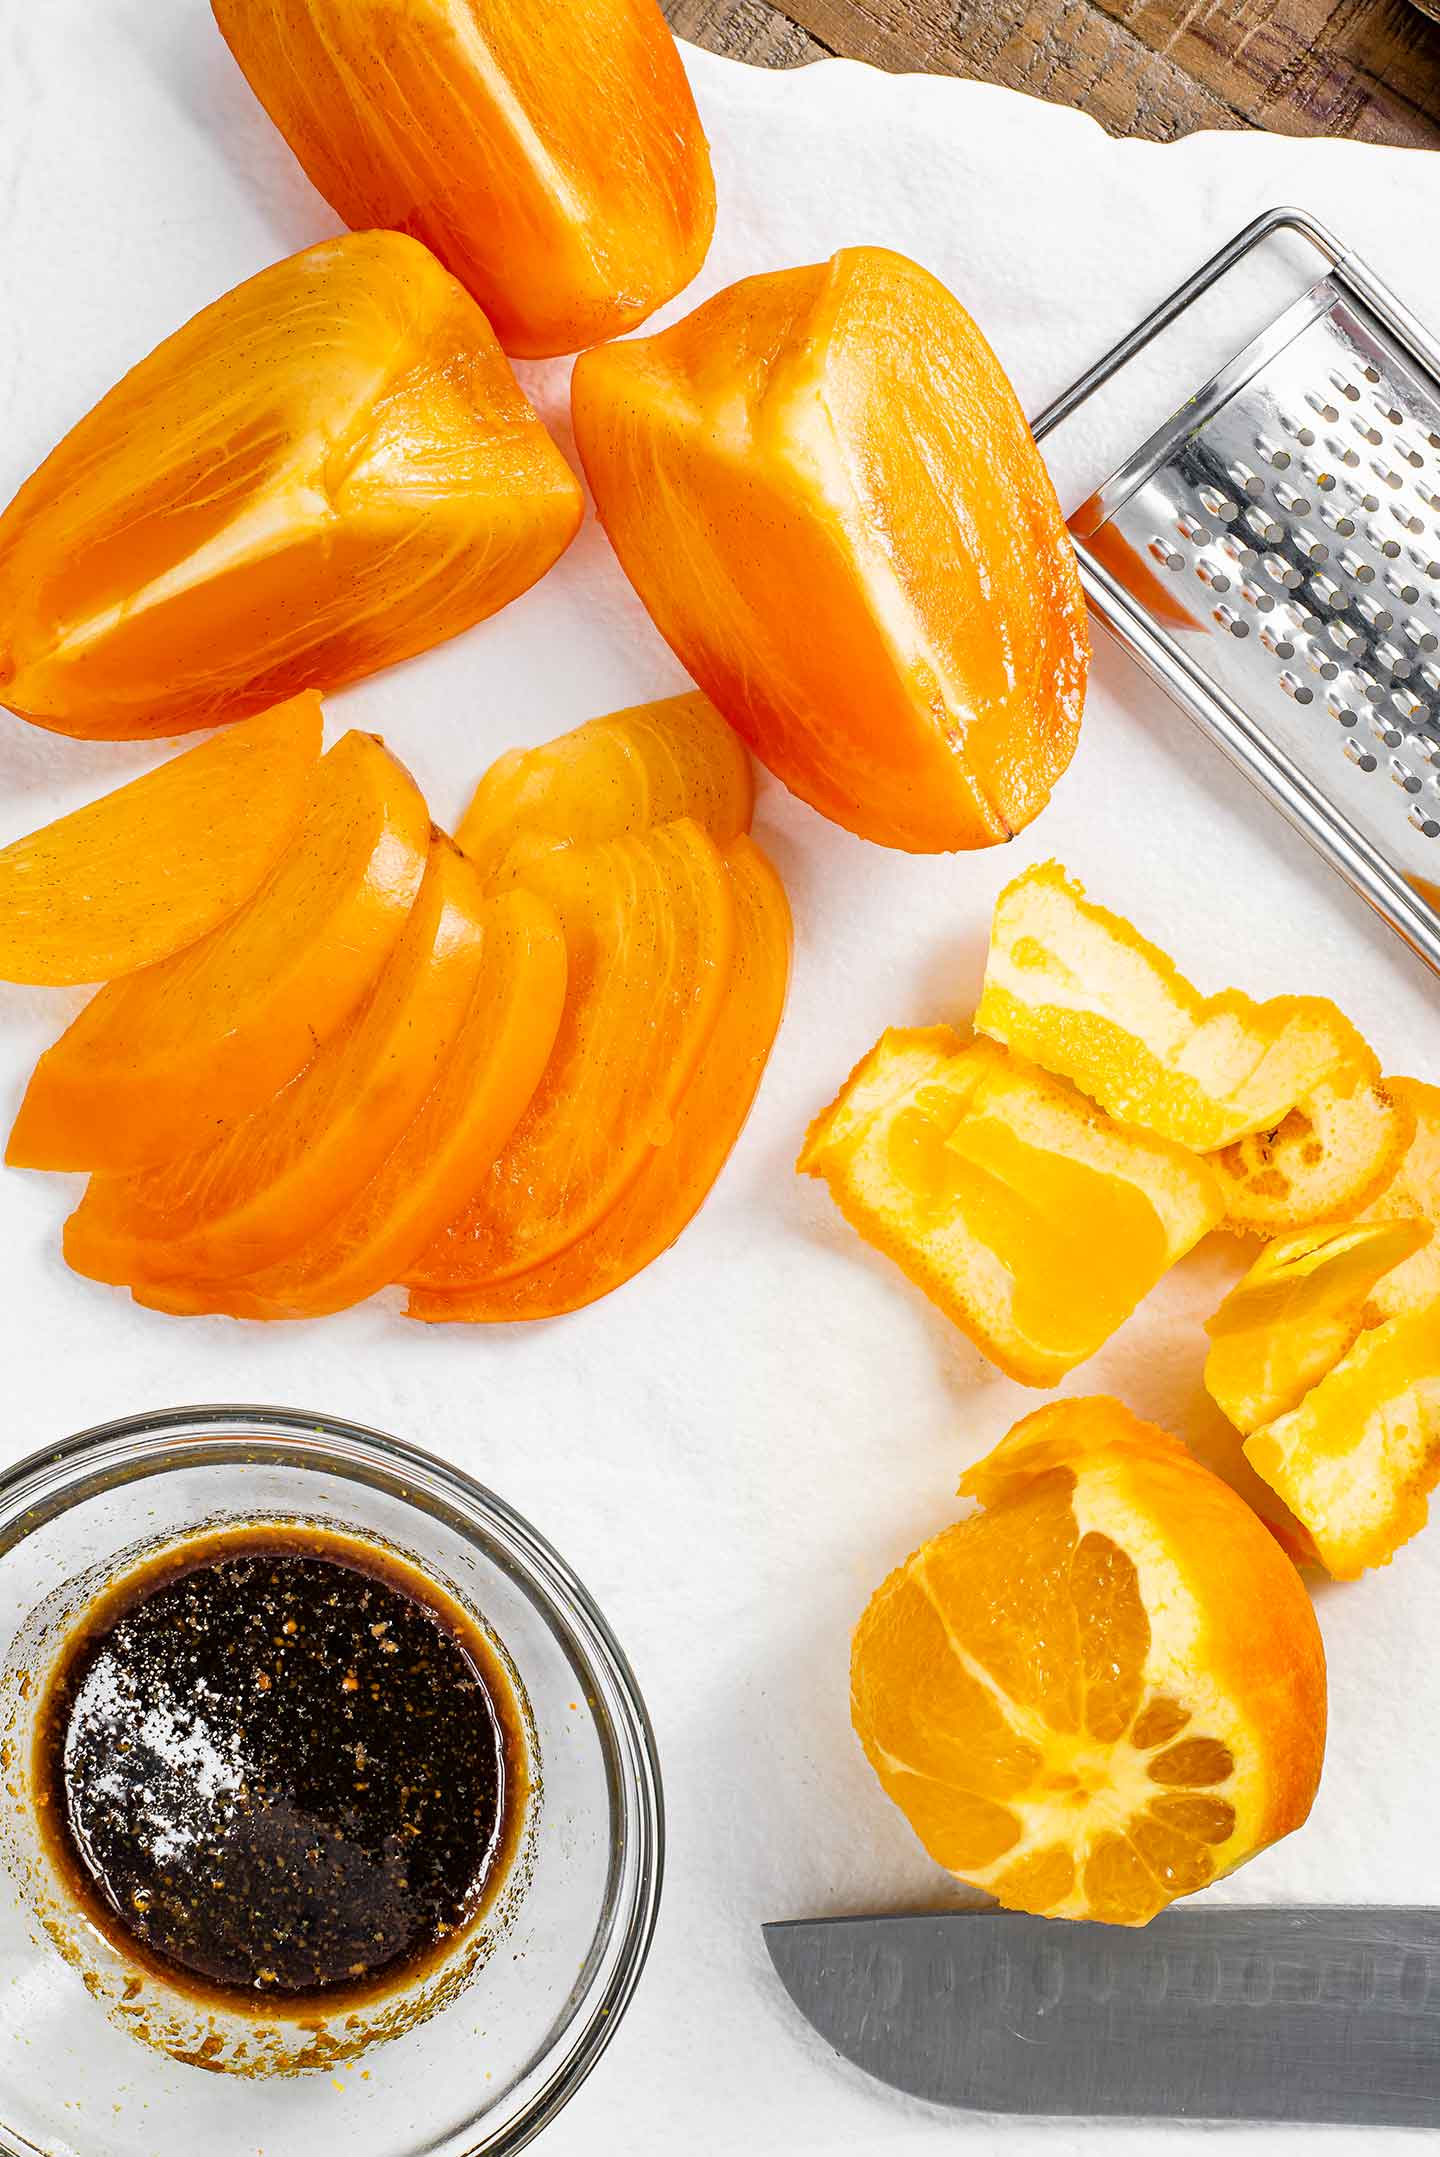 Top down view of sliced orange and persimmon on a white tray with a small dish of dark coloured dressing speckled with fresh orange zest.